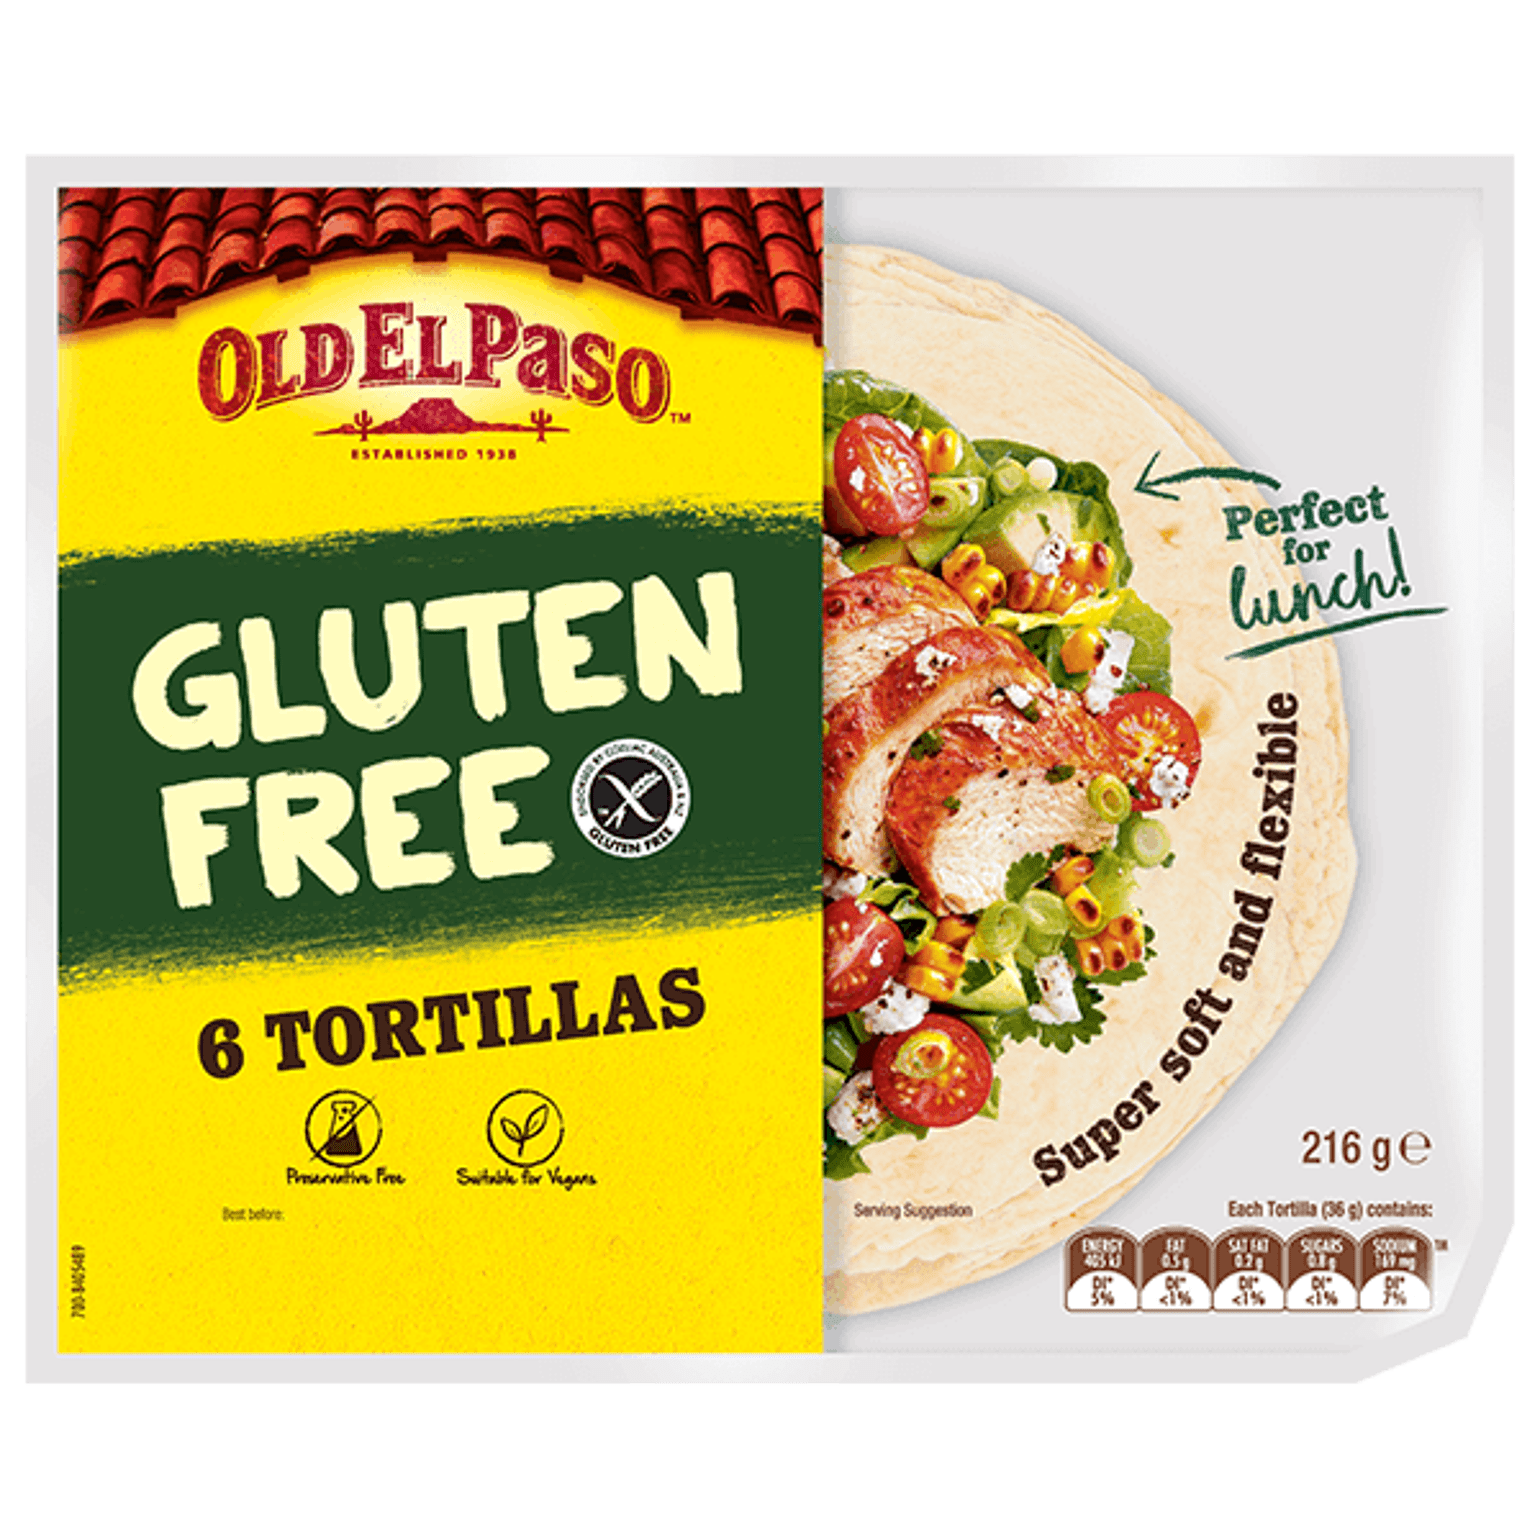 a pack of Old El Paso's 6 glutefree tortillas (216g)